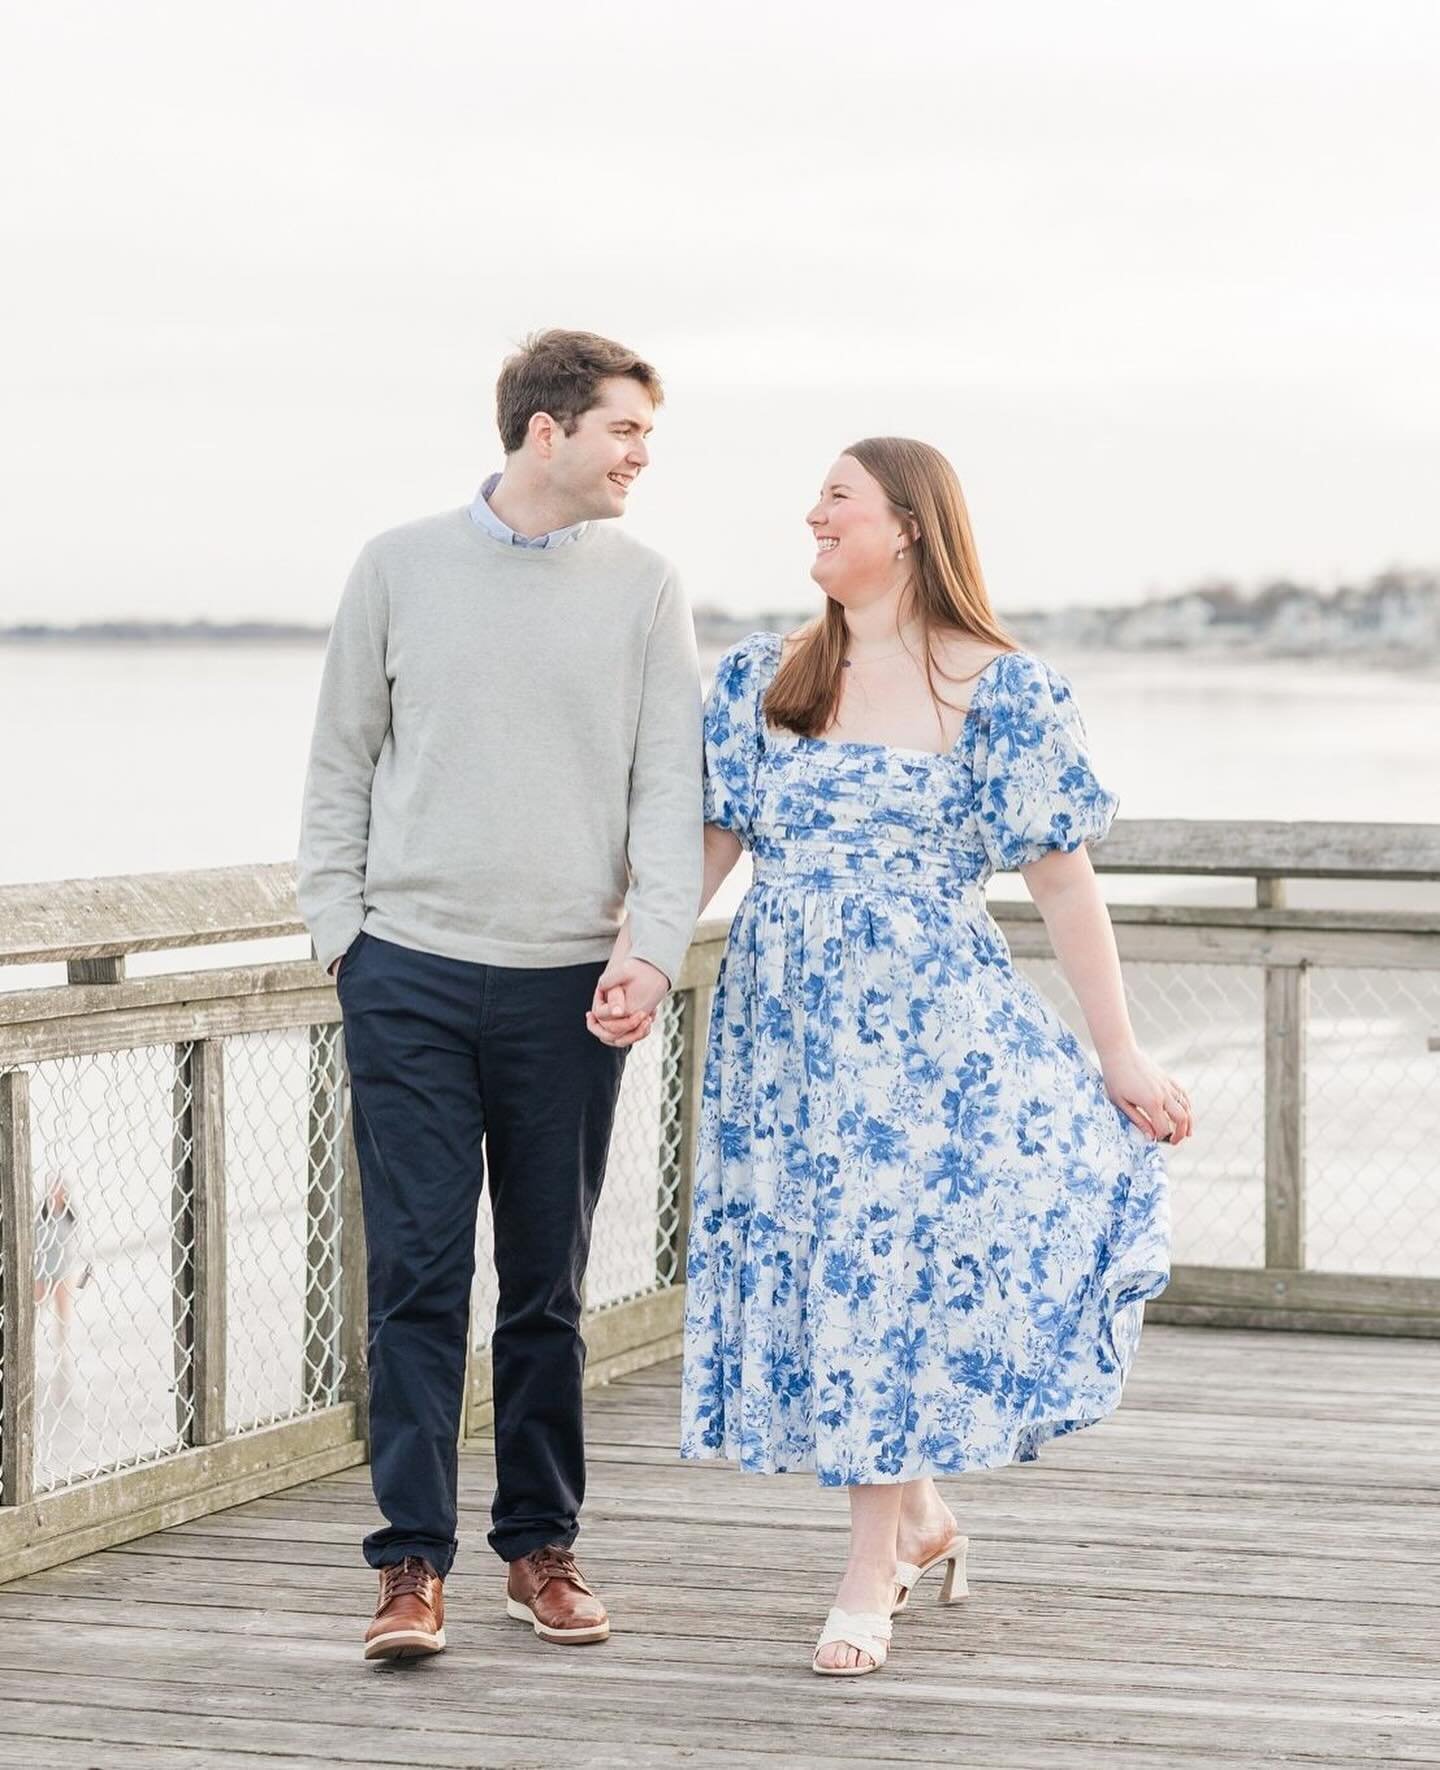 We spent some time with these sweethearts last week during their engagement session, and they were all smiles the entire time.  We know their coastal wedding celebration this December is going to be a beautiful one!⁠
.⁠
.⁠
.⁠
.⁠
.⁠
#shainaleecouples 